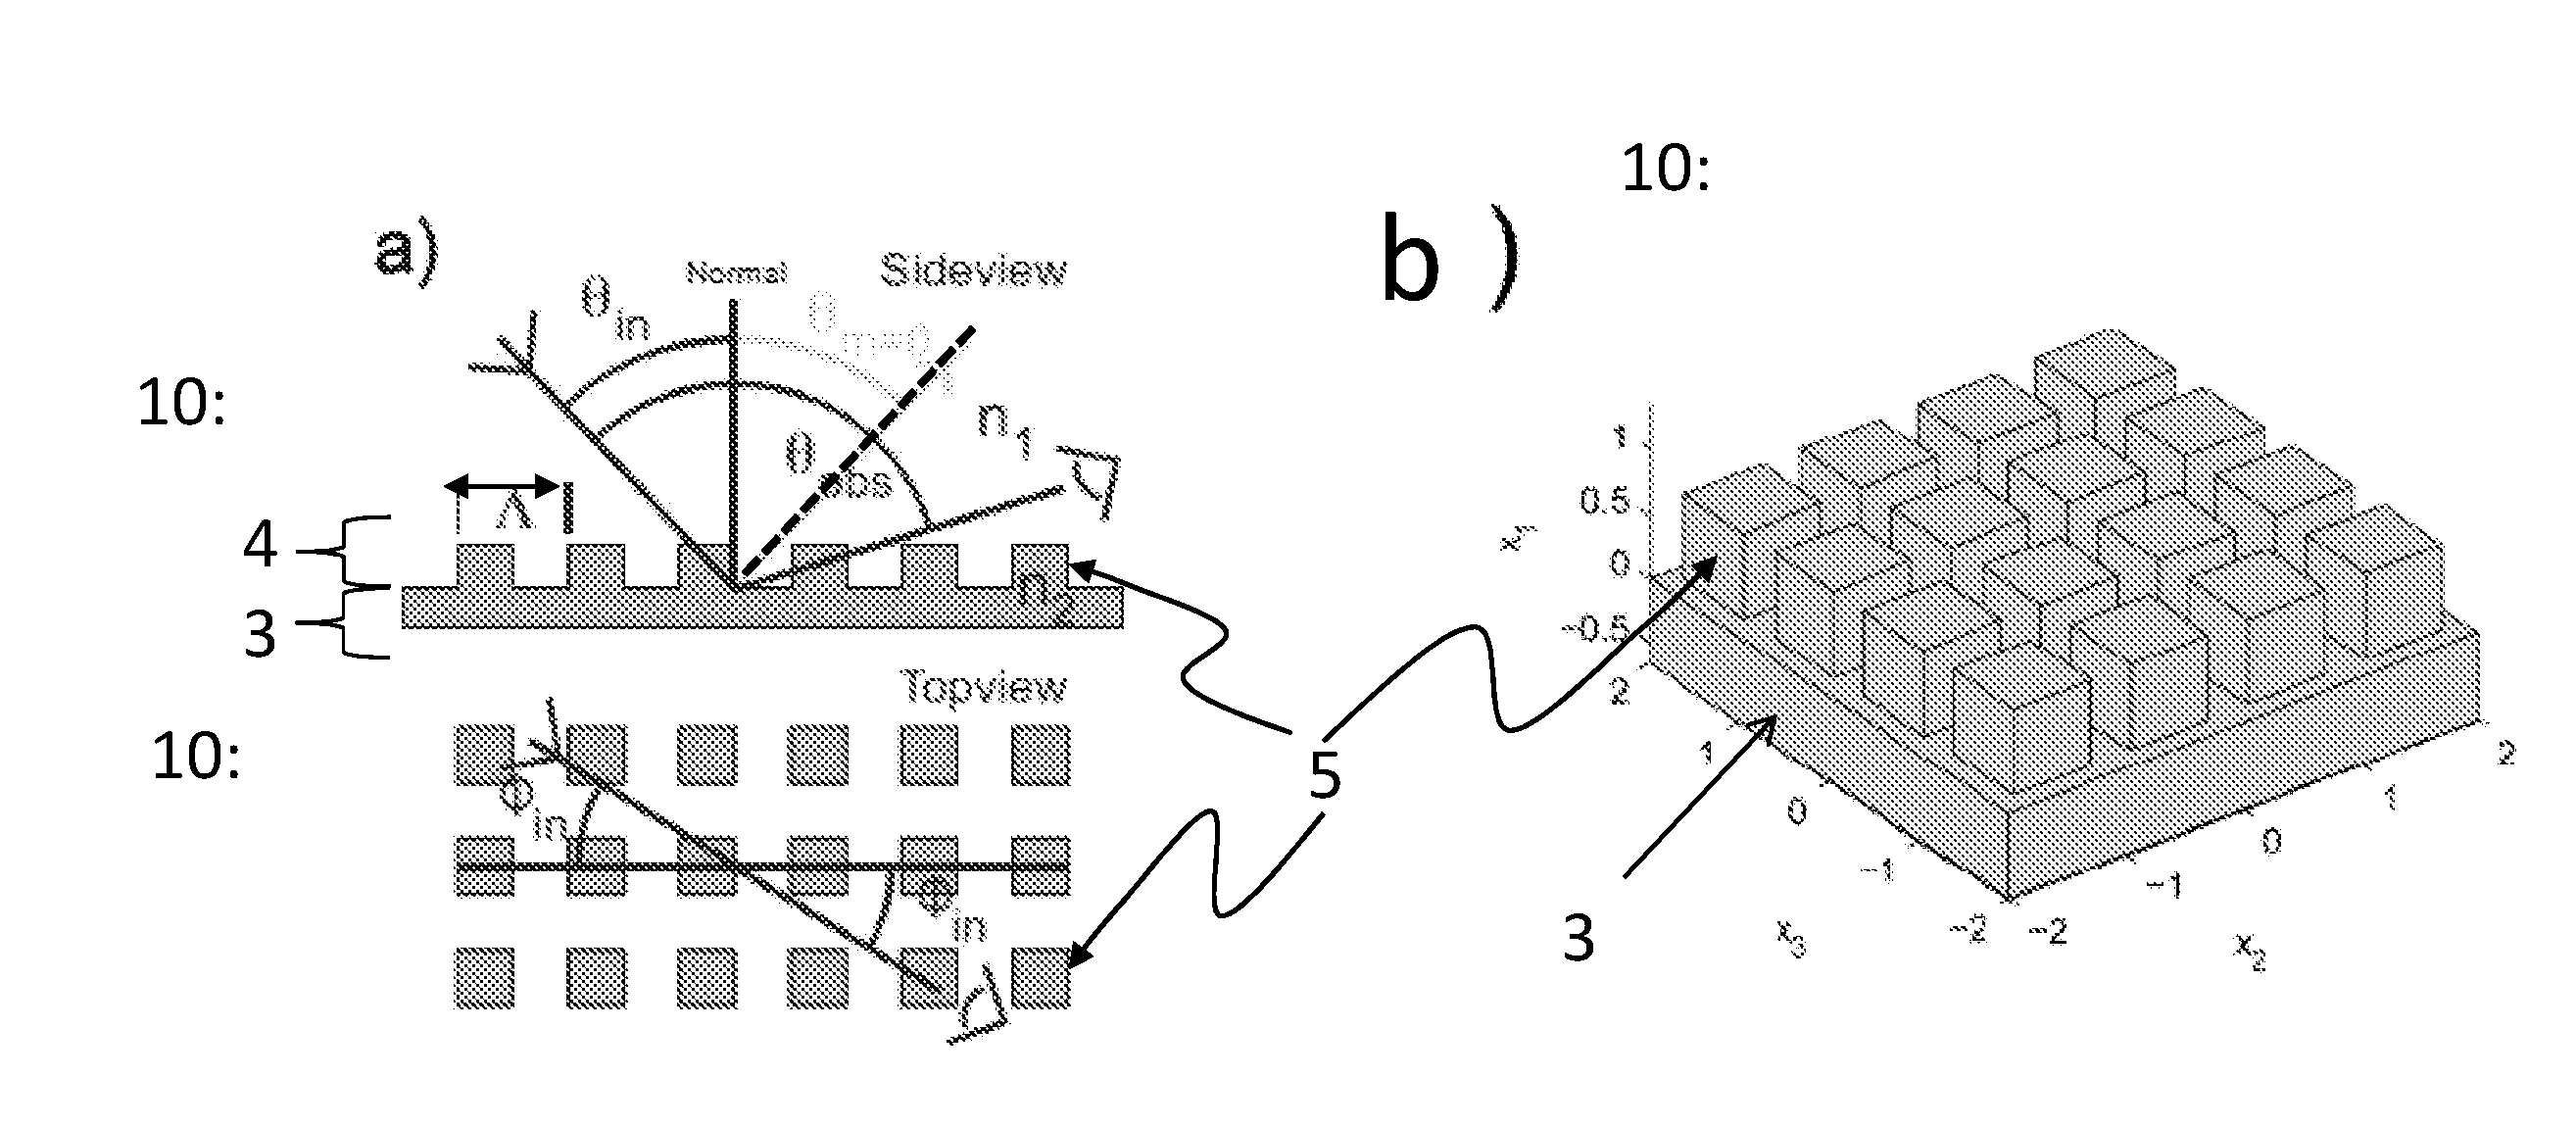 An optical device capable of providing a structural color, and a corresponding method of manufacturing such a device